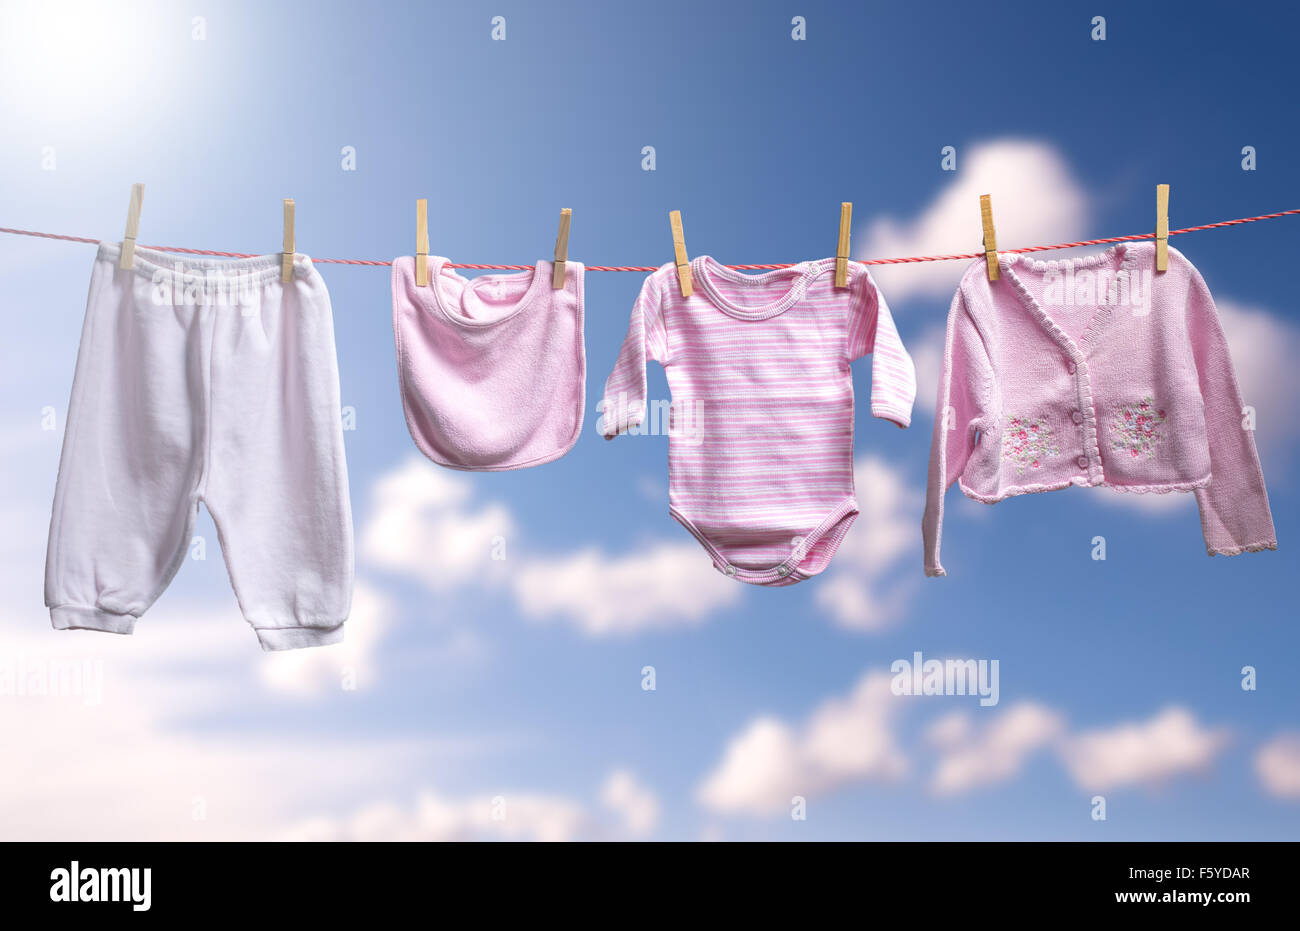 Clean baby girl clothes on the outdoor clothesline Stock Photo